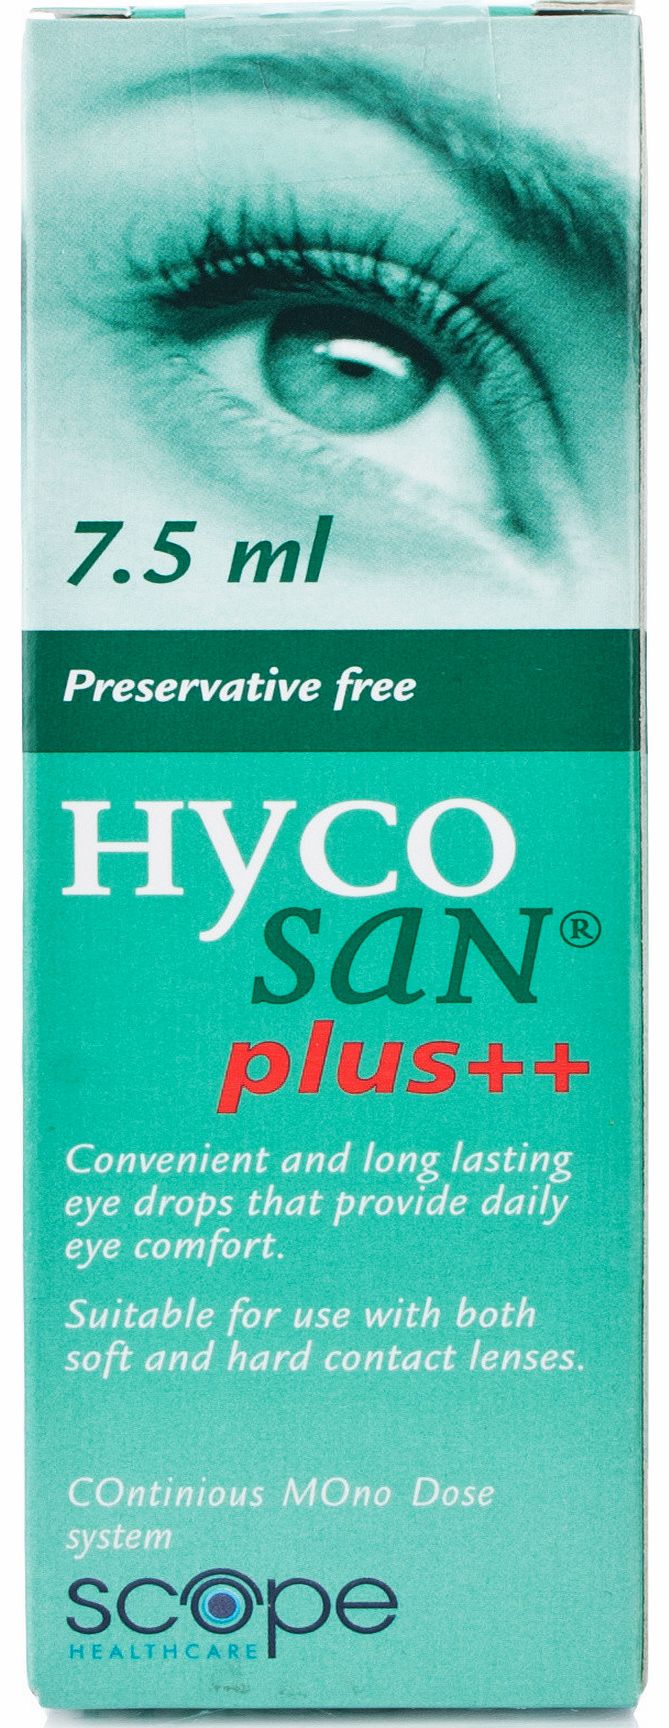 Hycosan Plus is formulated to provide your dry and tired eyes with instant moisture and refreshment. These special eye-drops contains 0.1% Hyaluronic Acid and 2% Dexapanthenol which is a derivative of vitamin B5 and converts into pantothenic acid whe